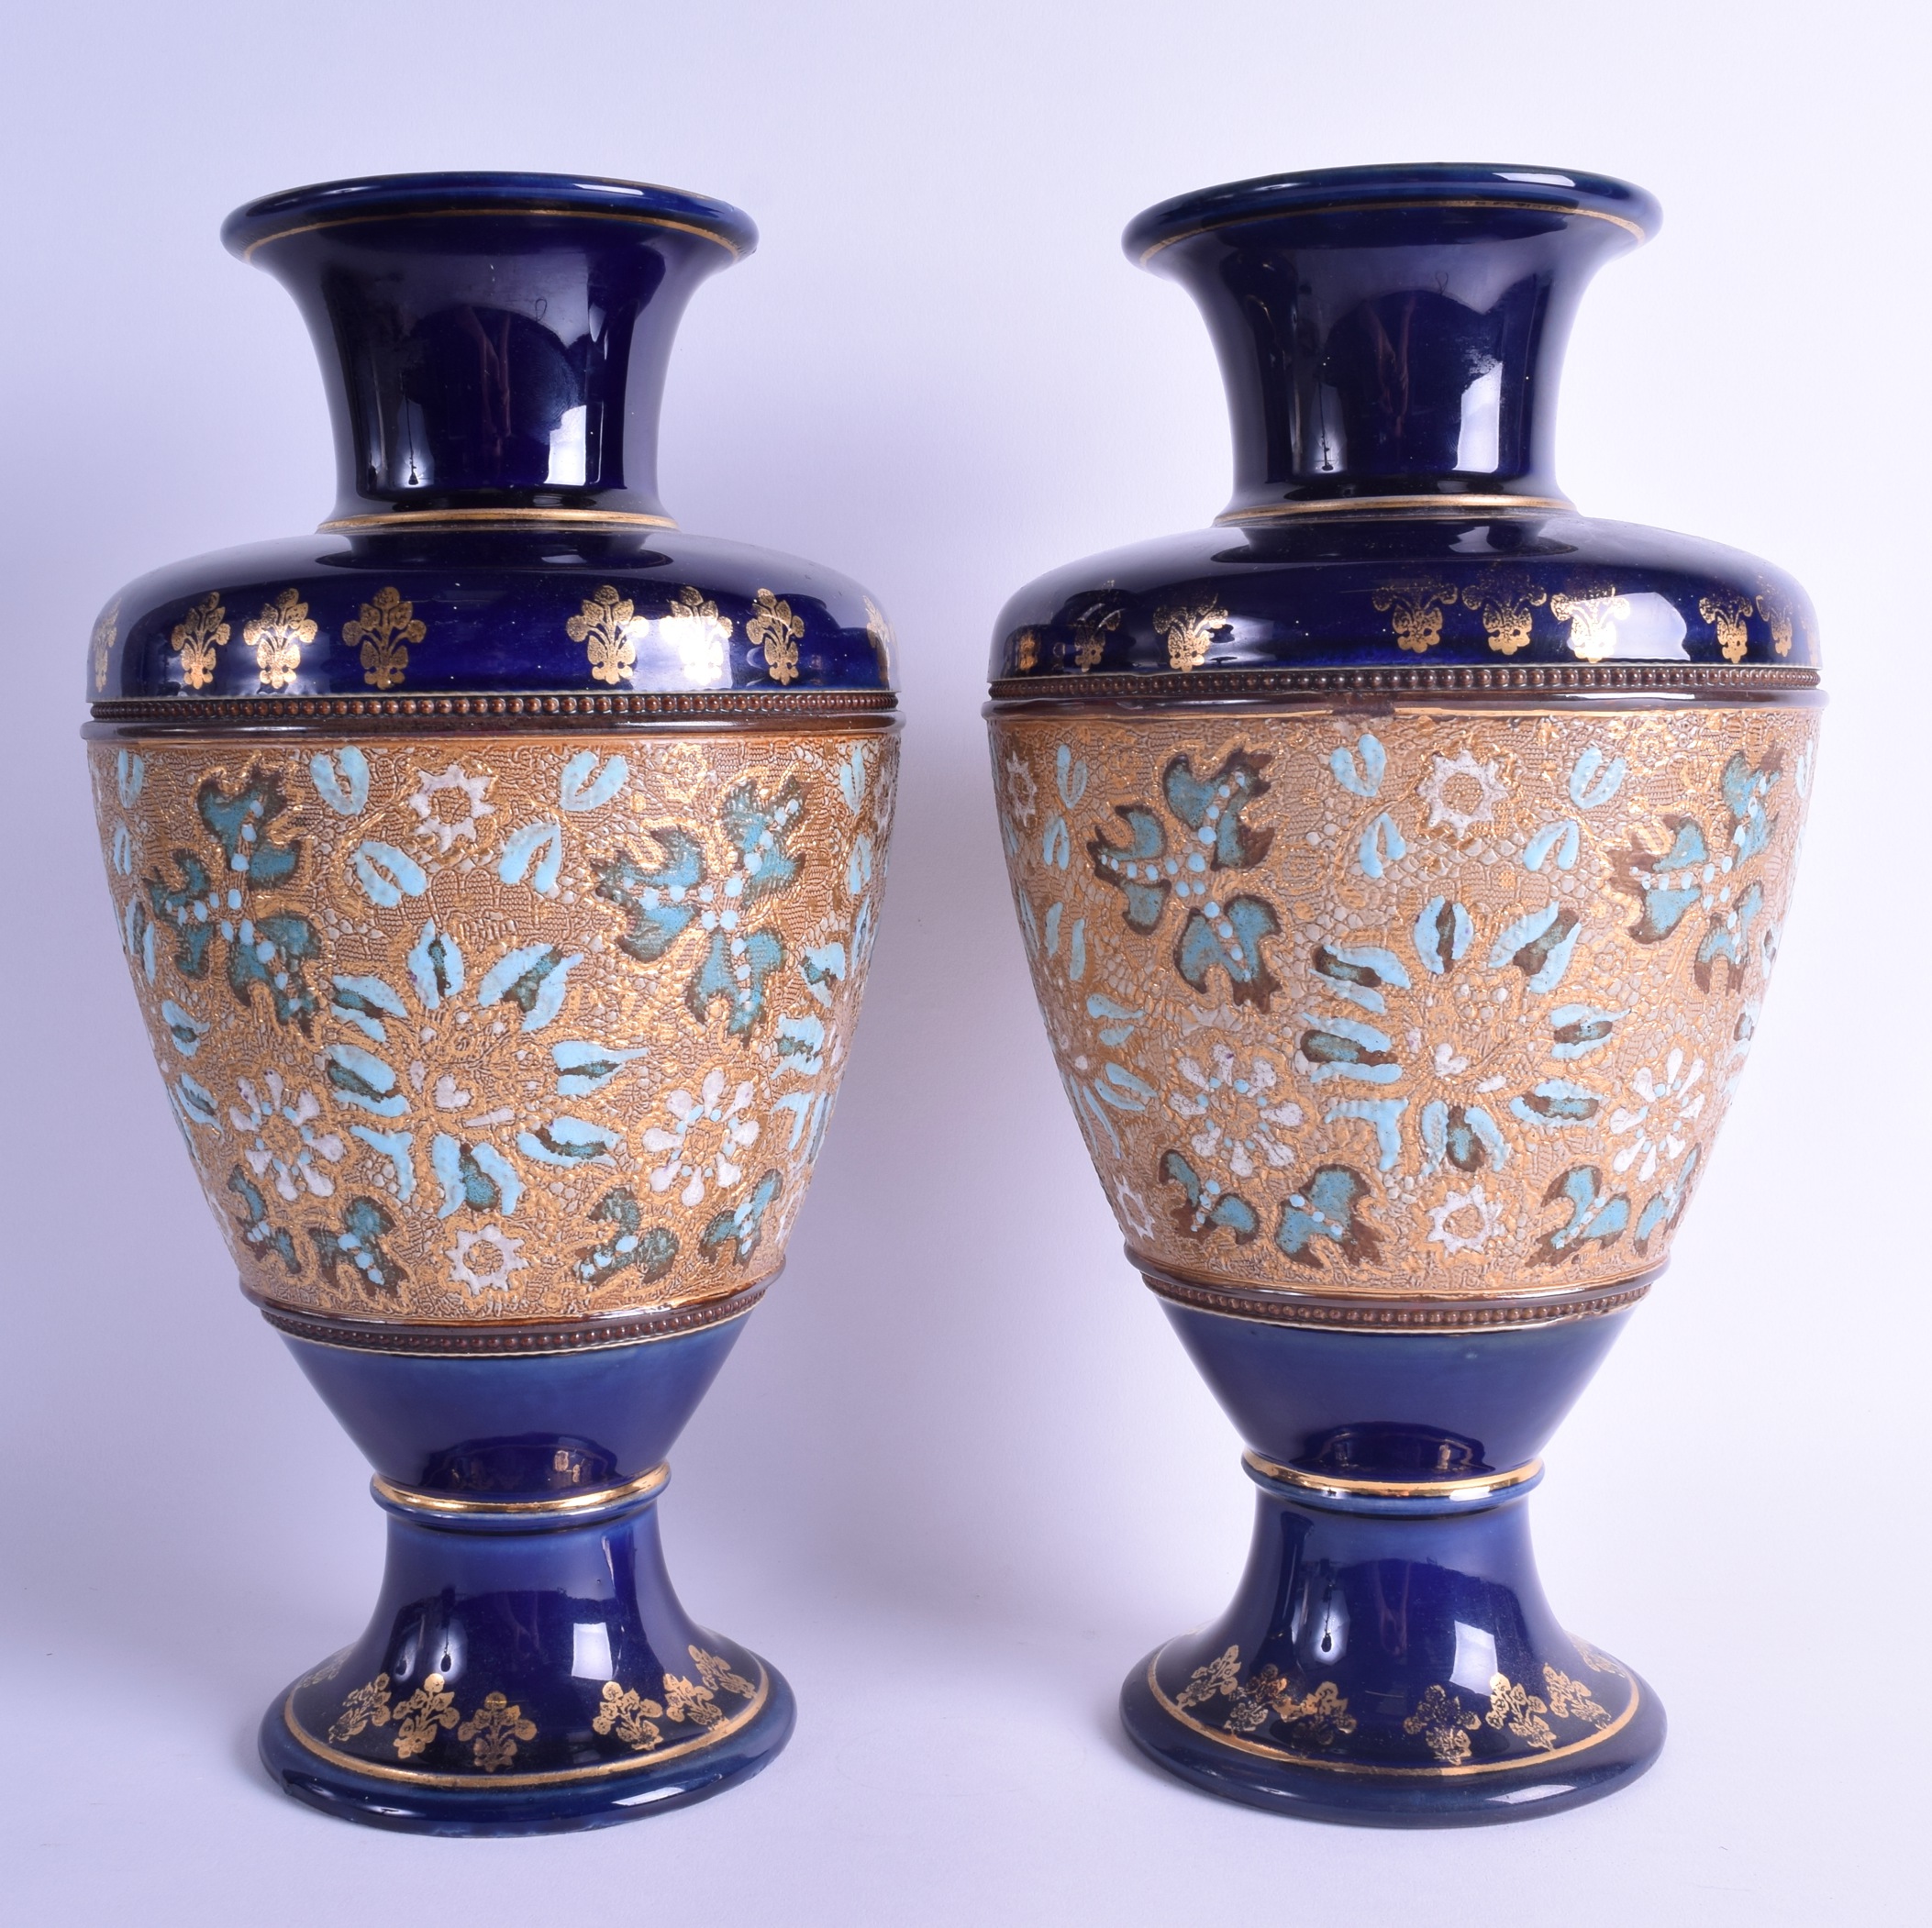 A LARGE PAIR OF VICTORIAN DOULTON SLATERS STONEWARE BALUSTER VASES painted with turquoise floral